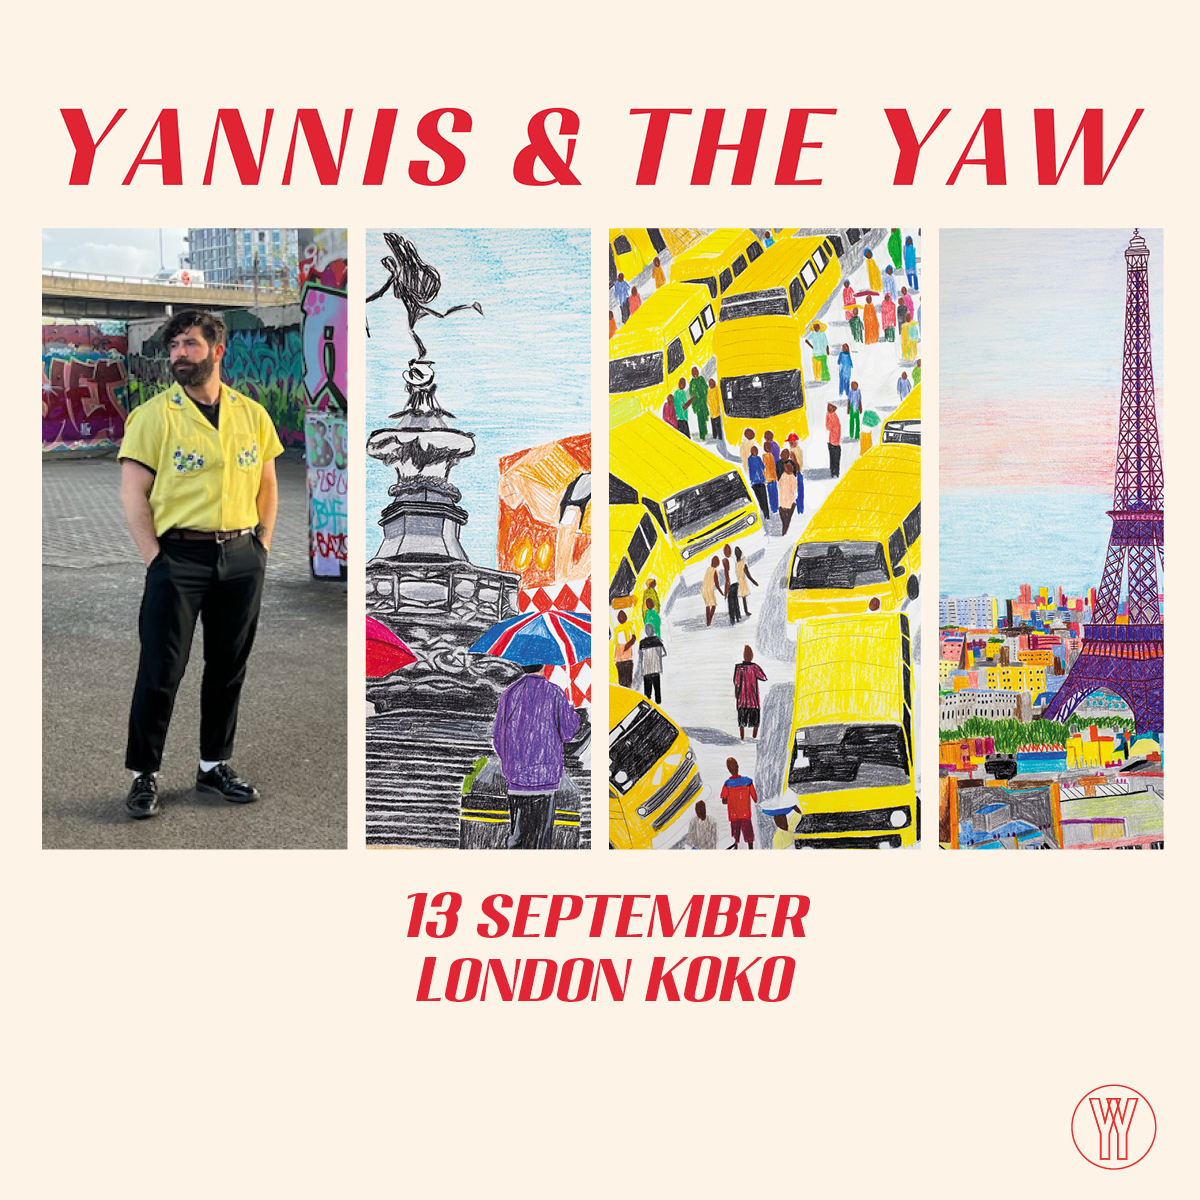 ANNOUNCING: @yannisandtheyaw come to #KOKO for a special live performance on Sept 13th! Tickets on sale Fri, 10th May @ 10am. #yannisandtheyaw @YnnsPhilippakis